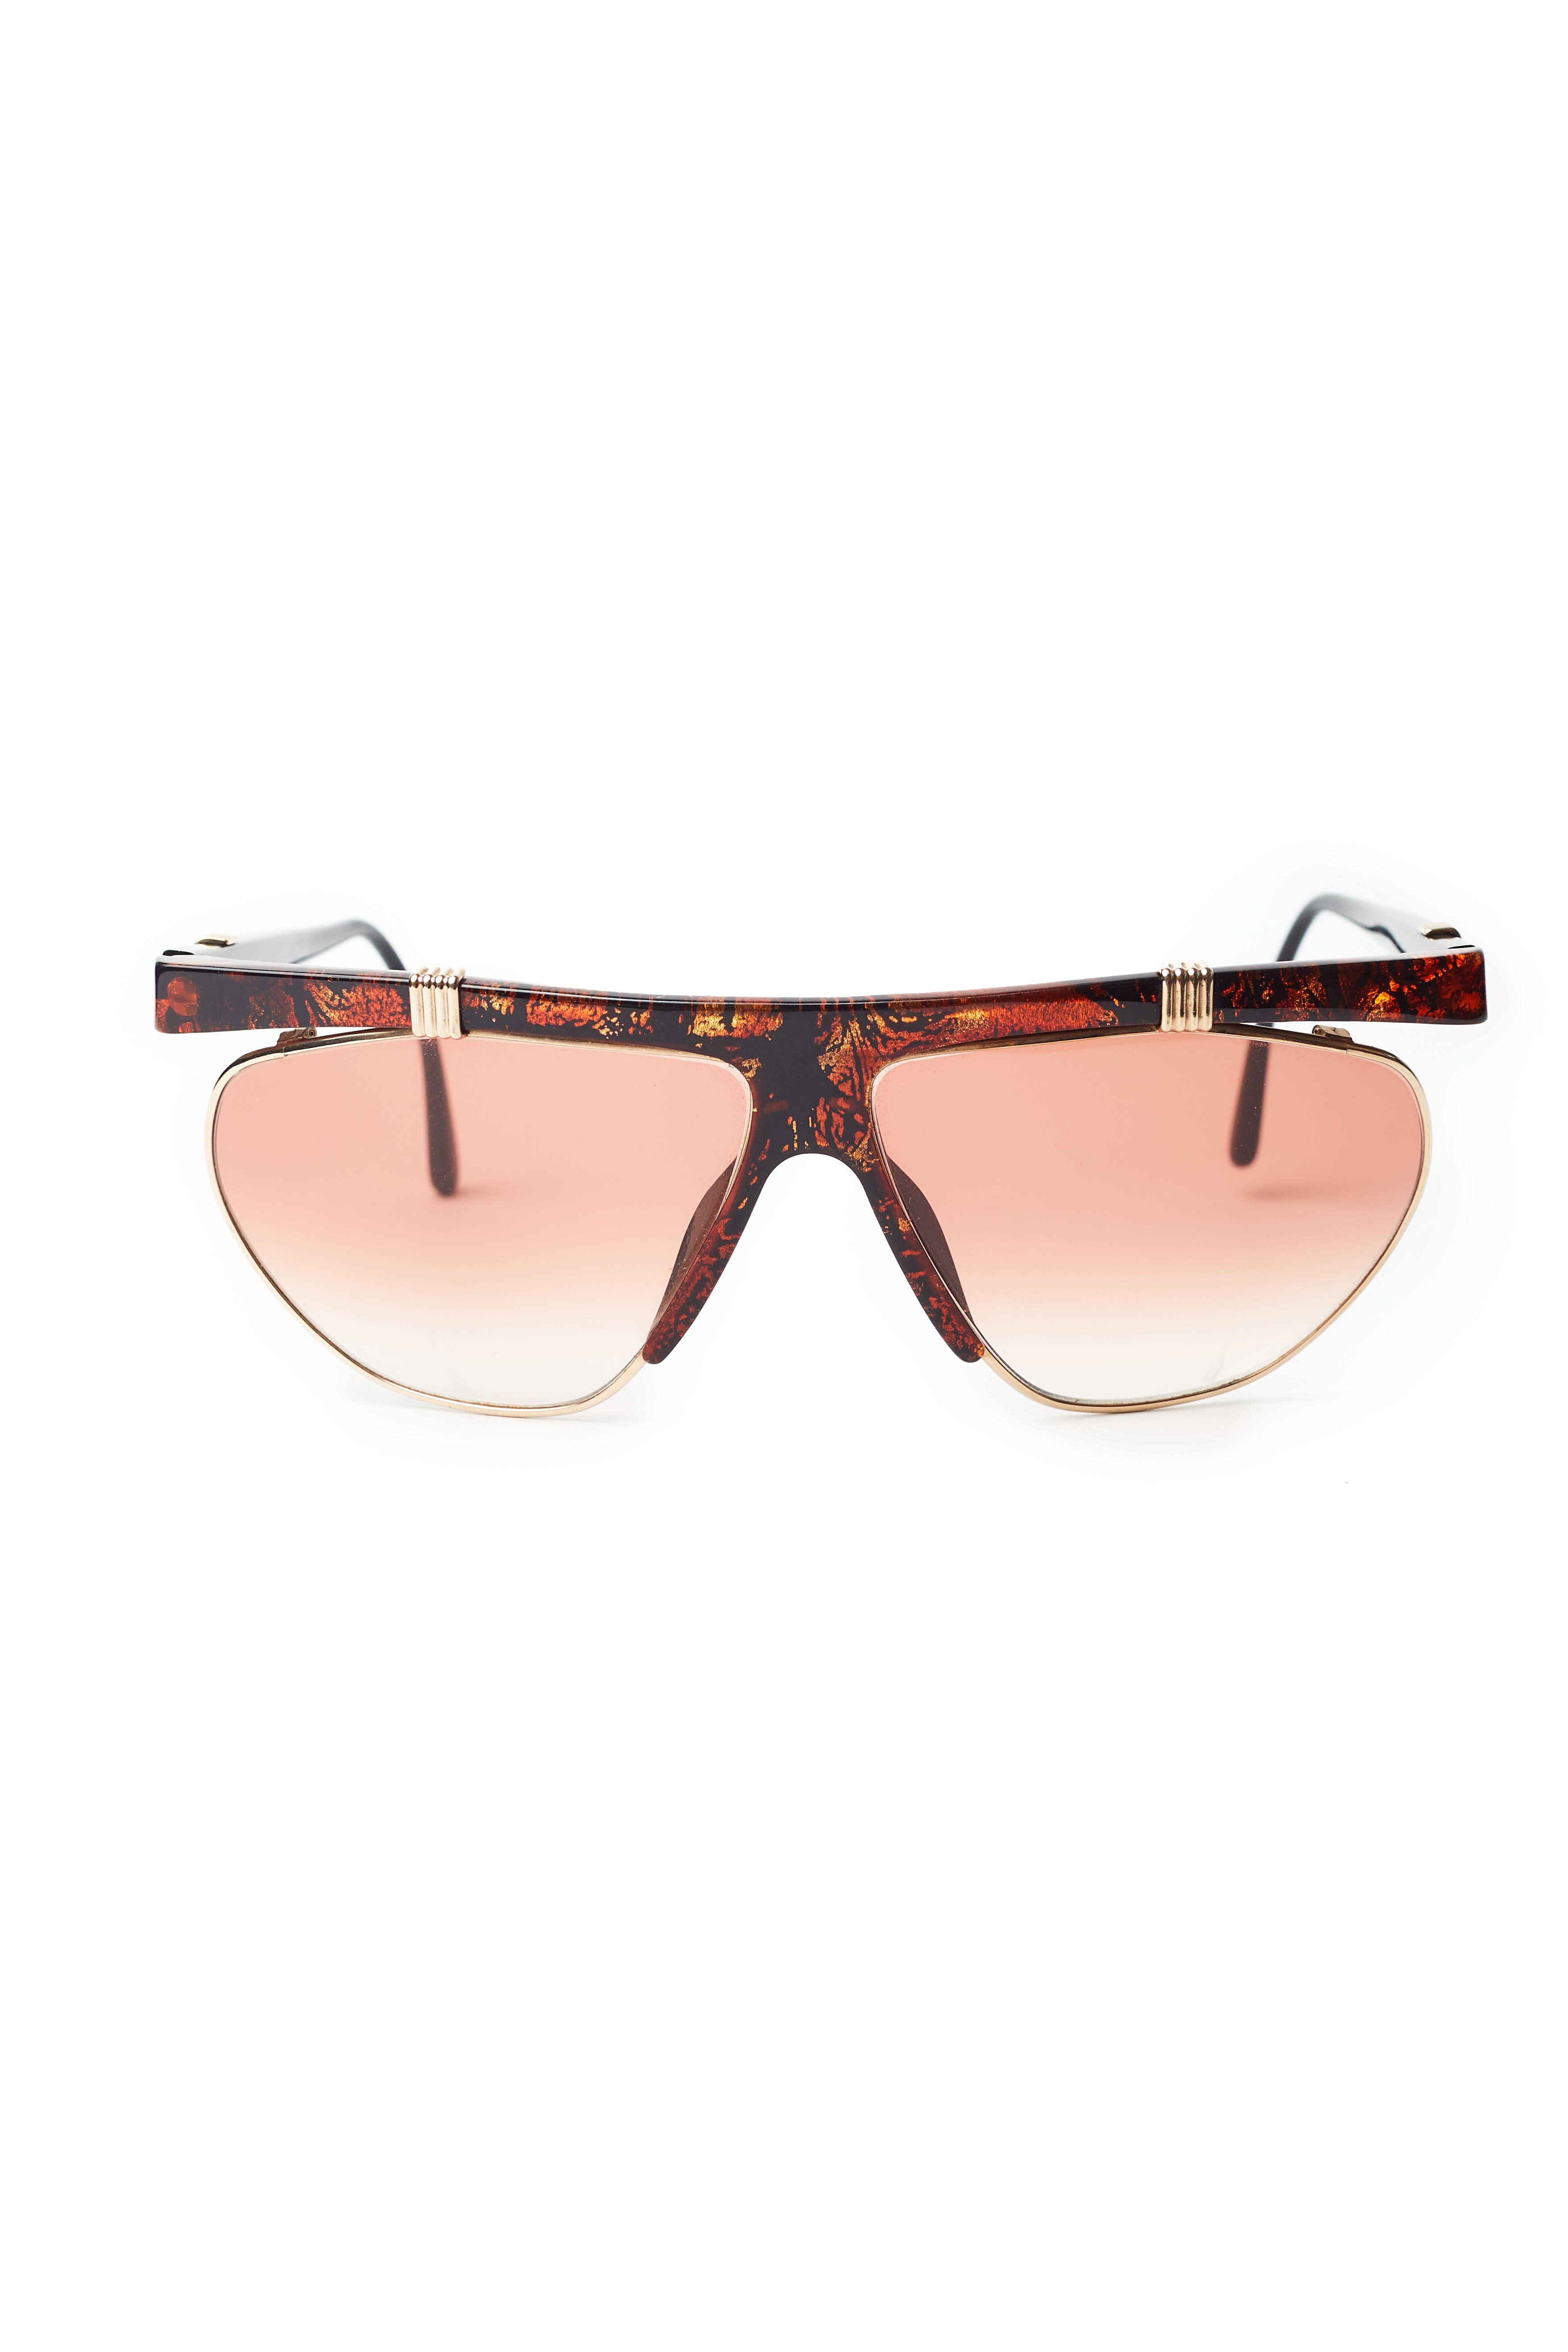 Christian Dior <br> 80's marbled angular frame sunglasses with CD logo arms